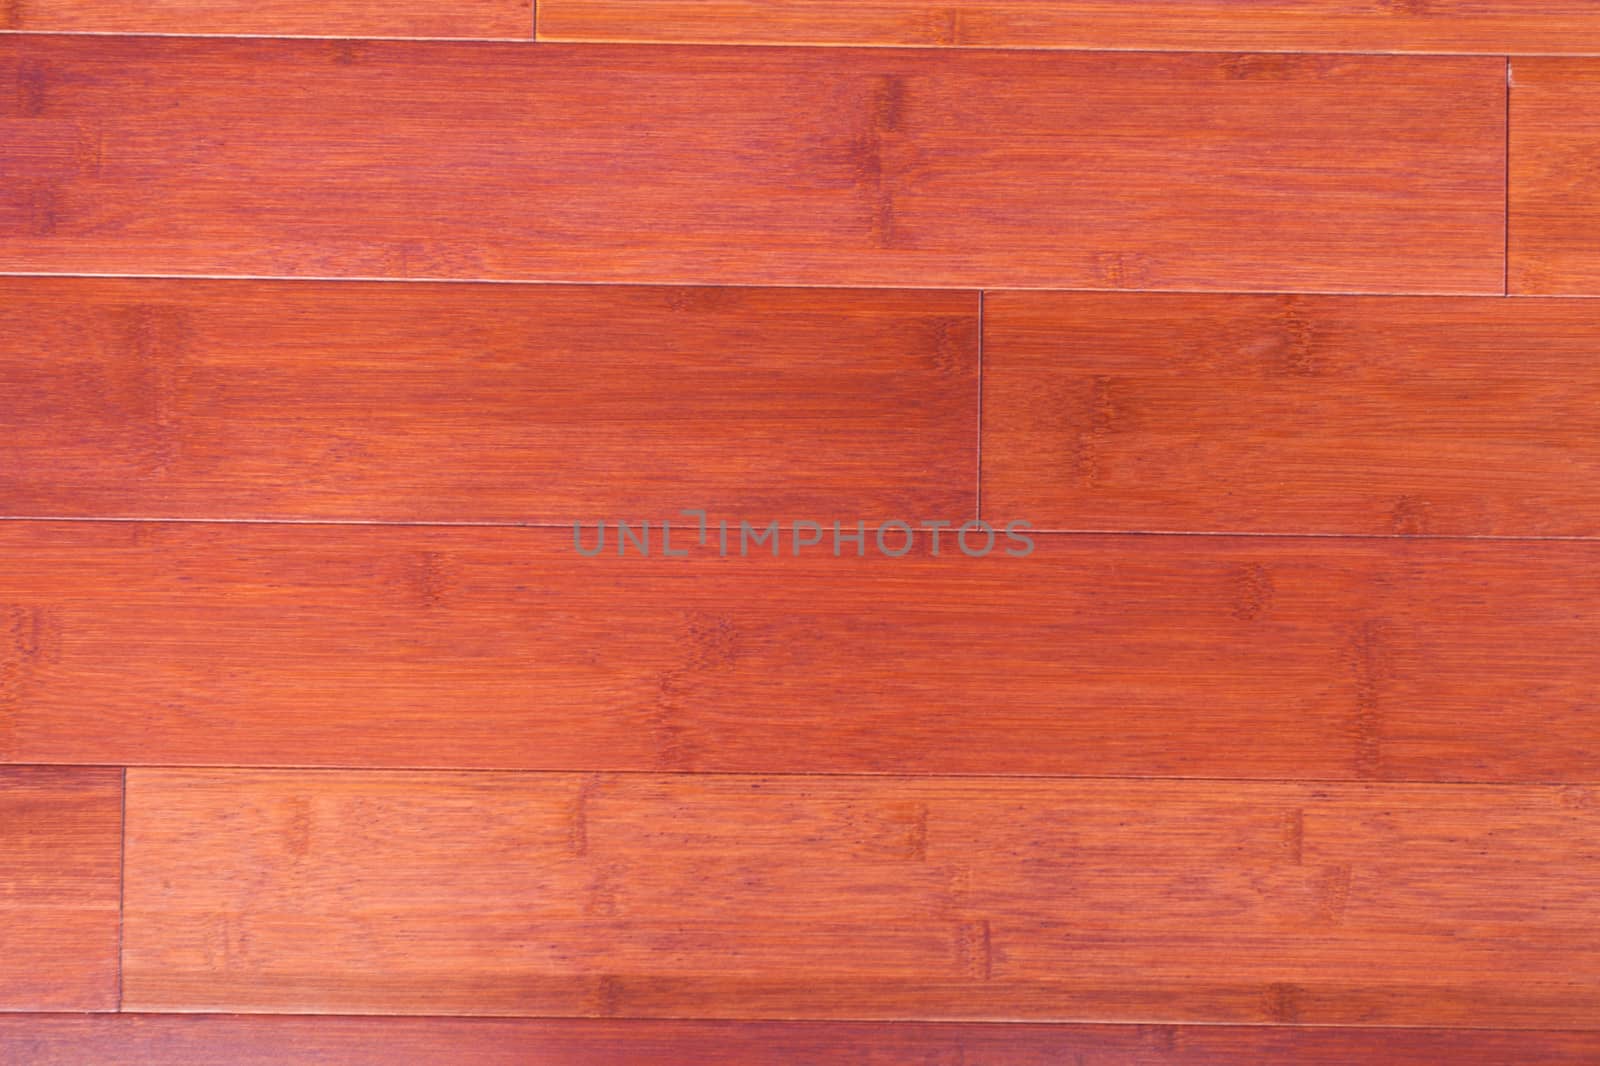 Red-brown stained bamboo plank flooring parquet natural wood grain background texture pattern